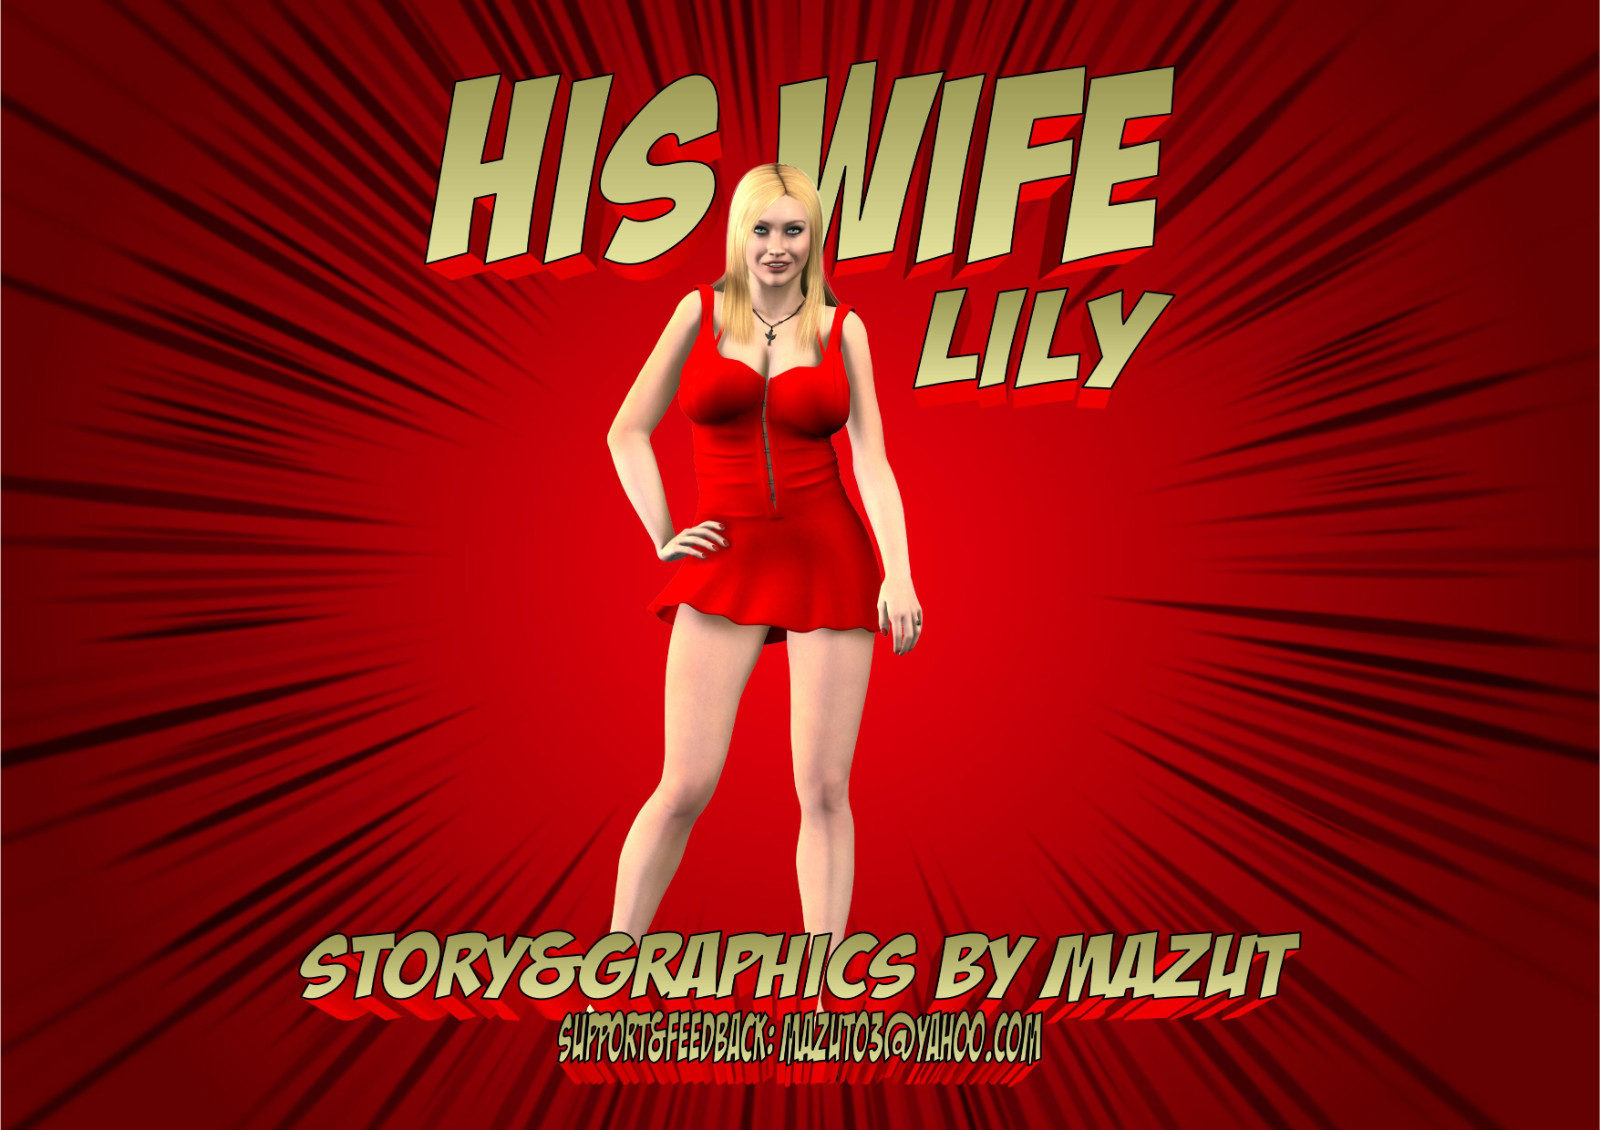 mazut-his wife lilly 1